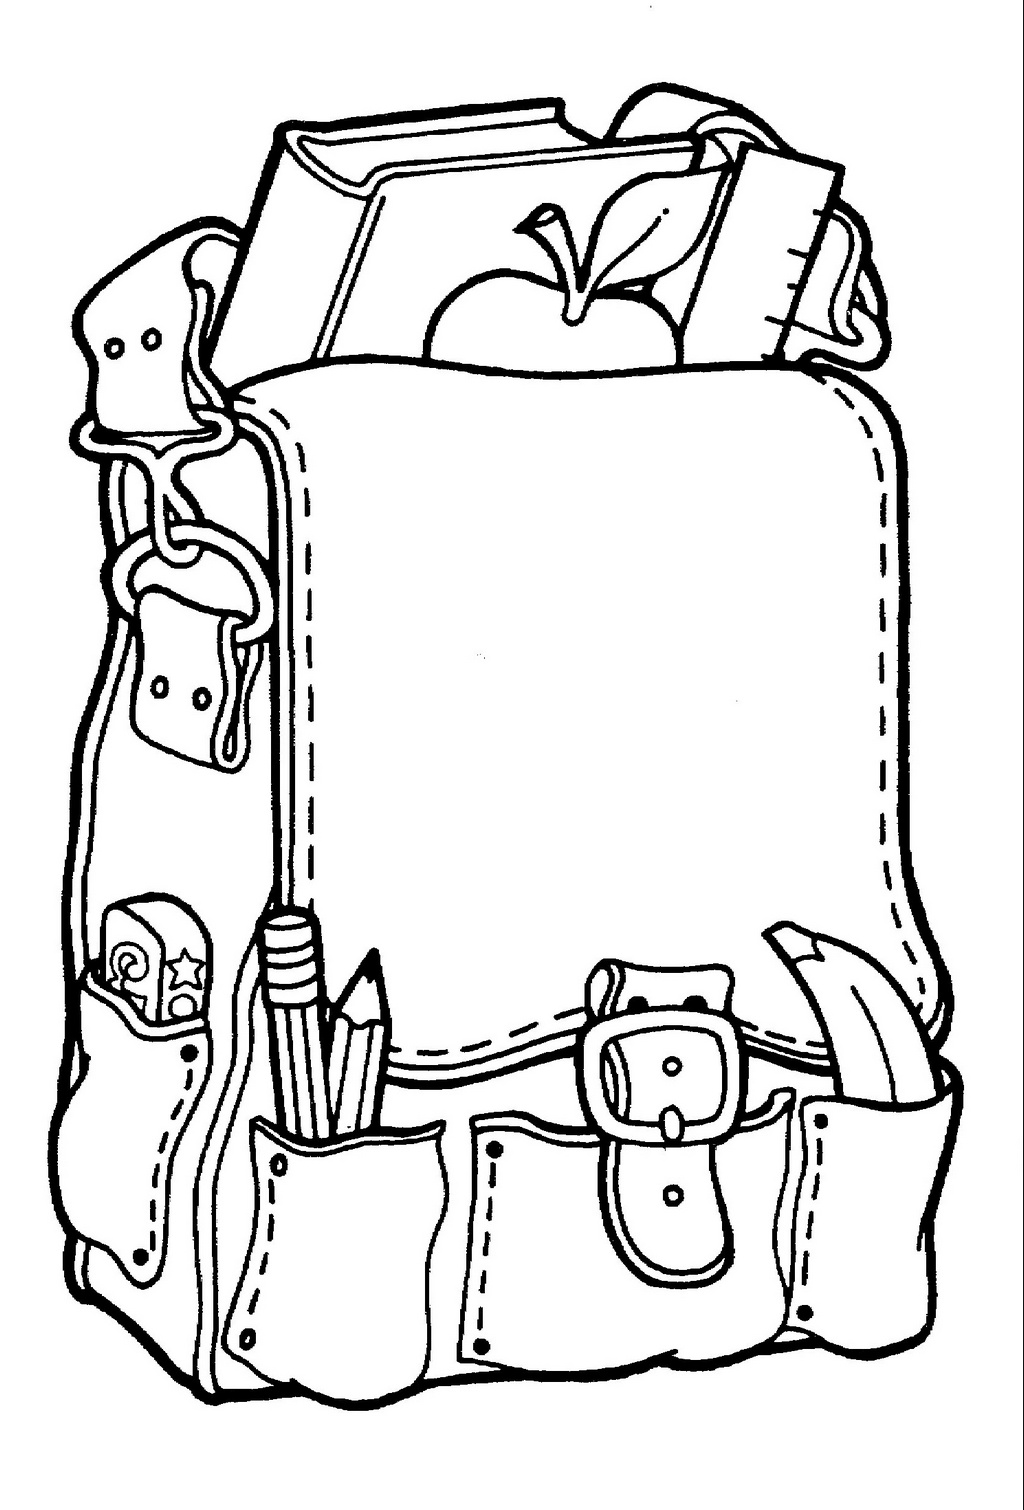 school bag backpack coloring picture